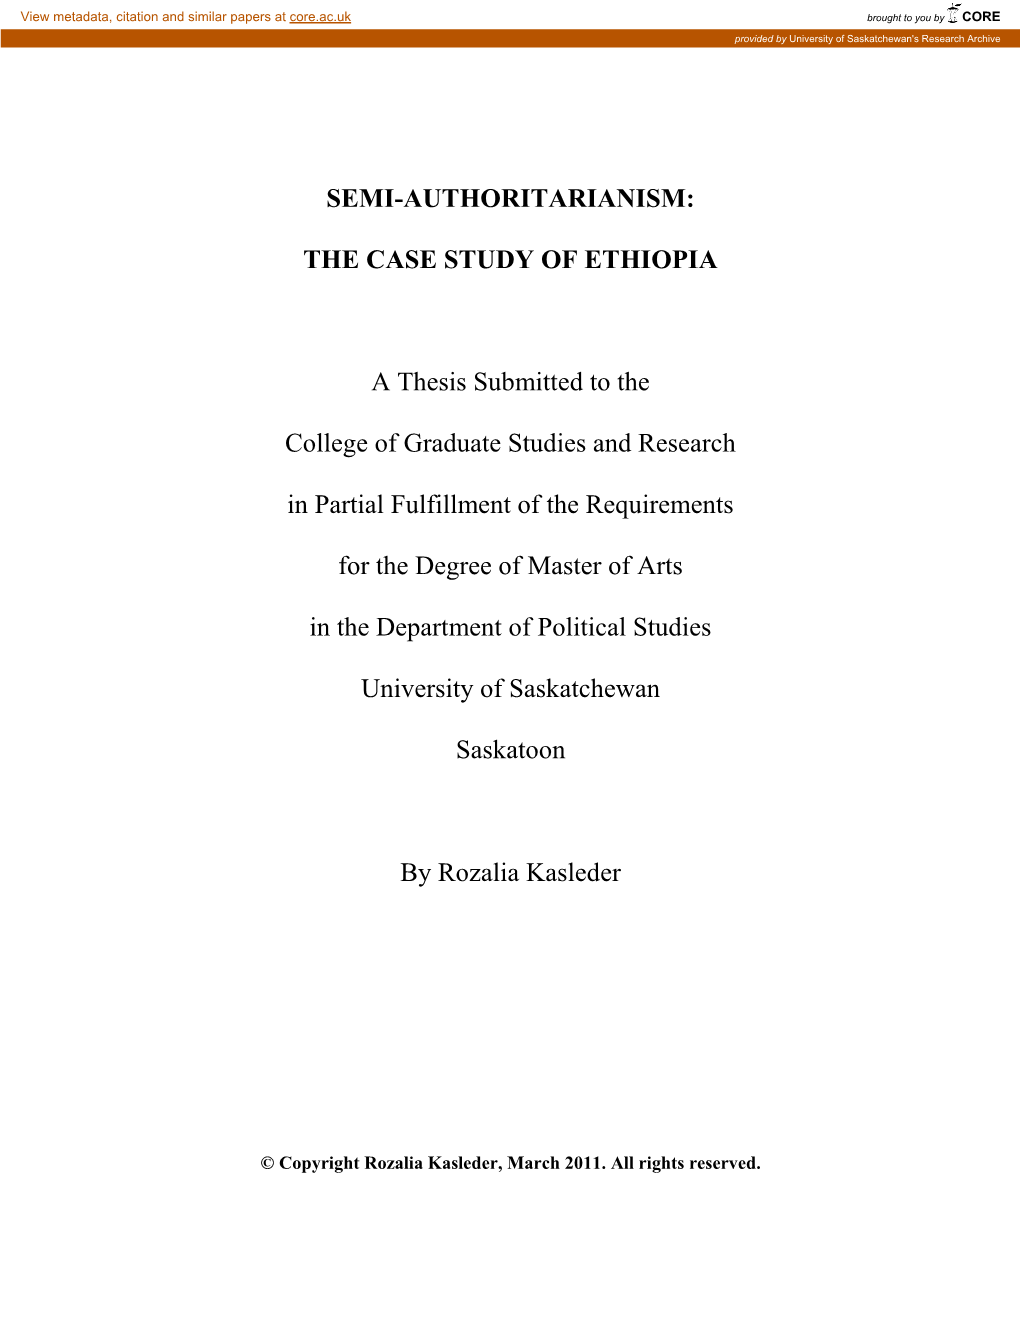 THE CASE STUDY of ETHIOPIA a Thesis Submitted to the College of Graduate Studies and Research in Parti